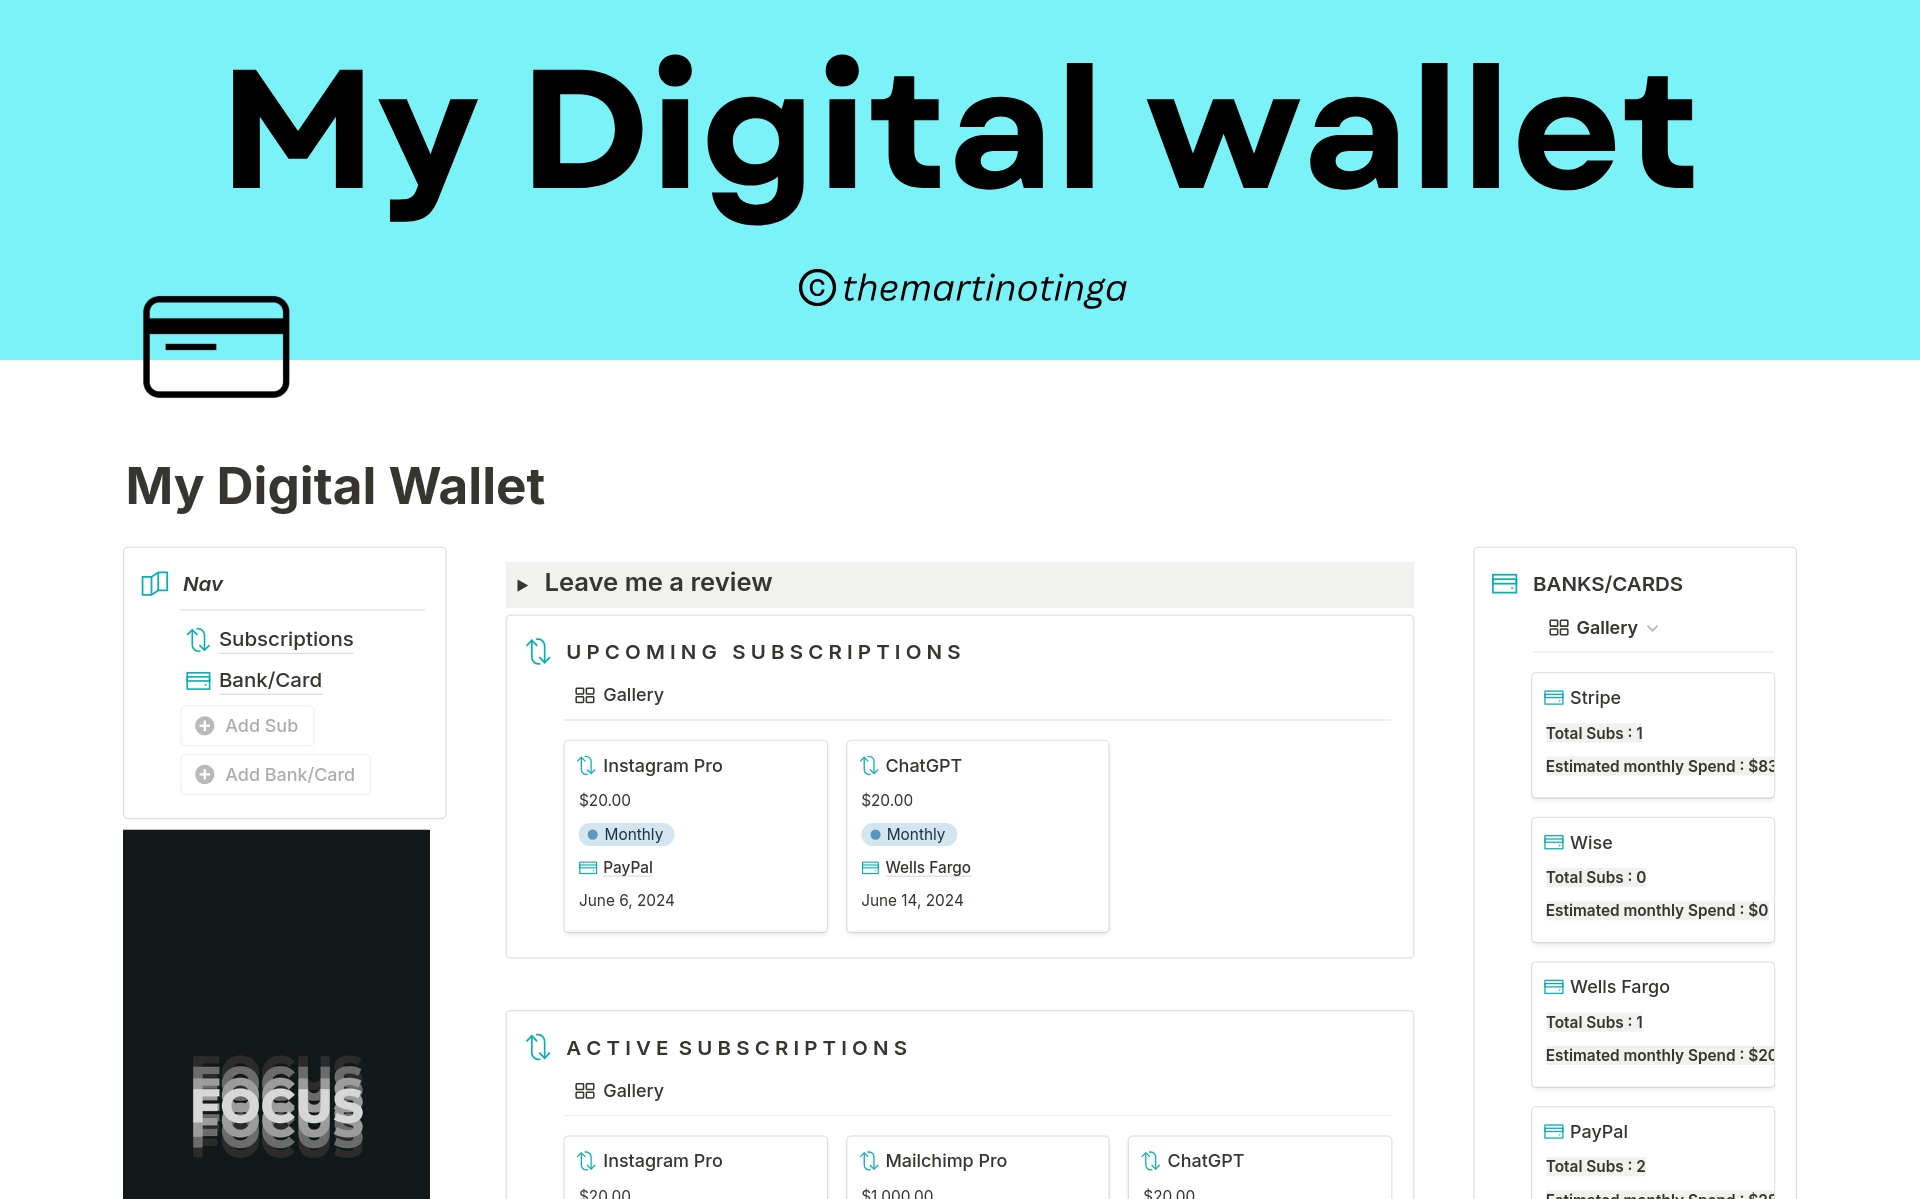 The Digital Wallet template is designed to help users manage their digital subscriptions, memberships, online services, and recurring payments in one centralized location